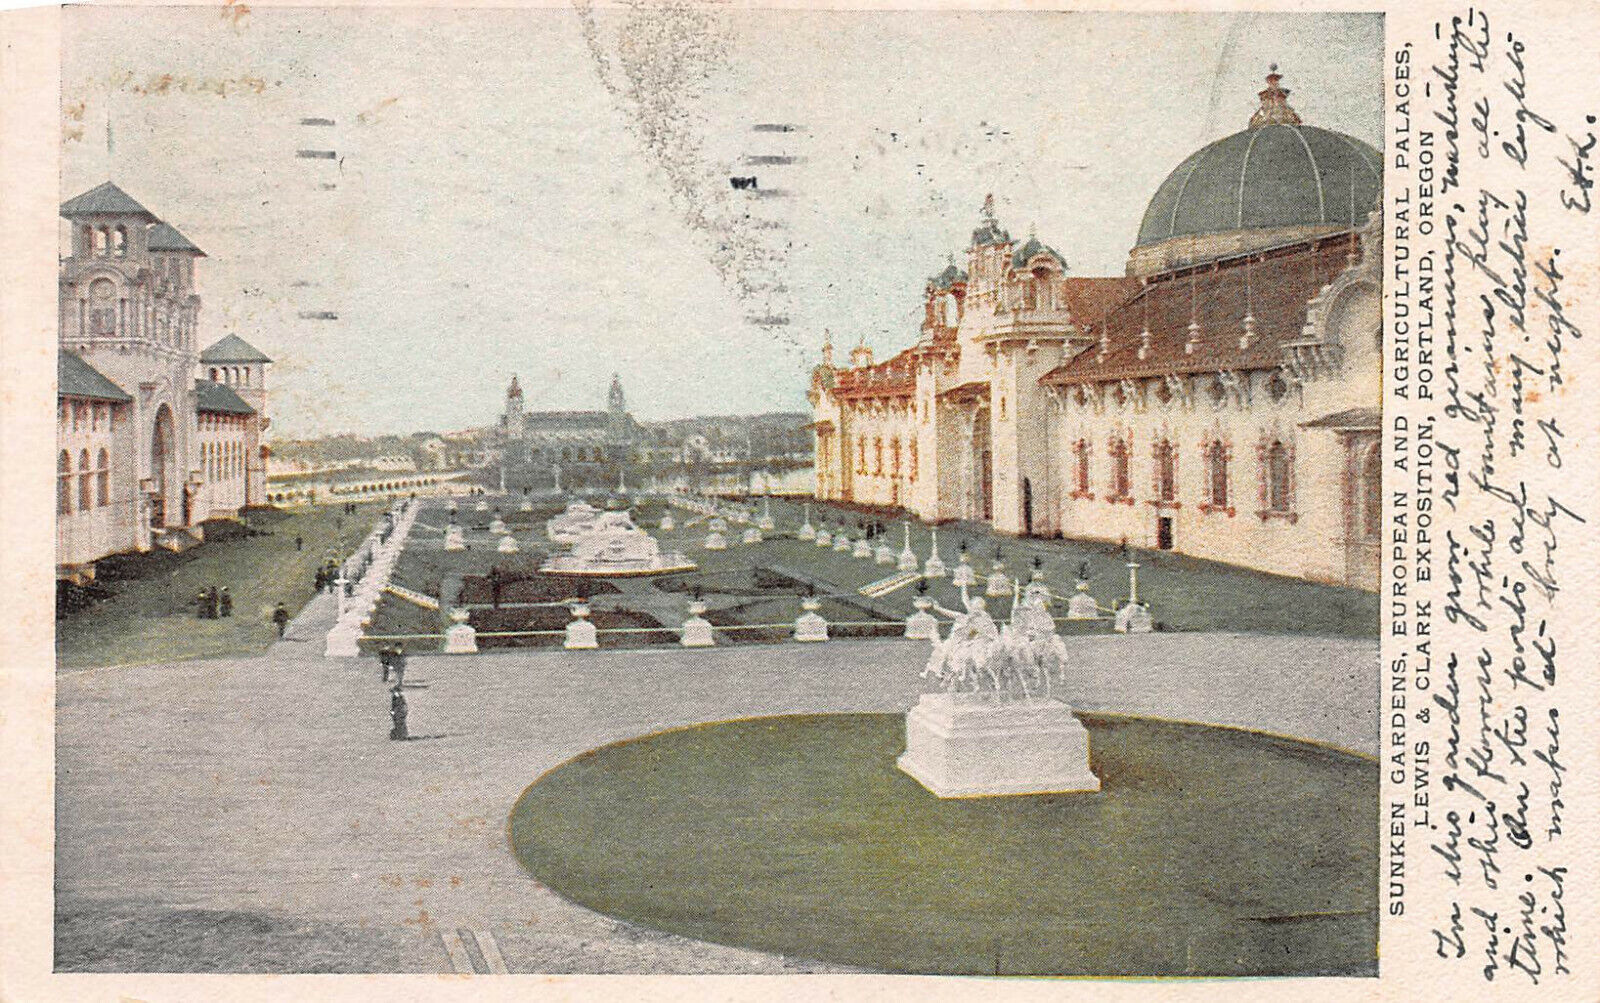 European & Agricultural Palaces, Lewis & Clark Expo, Portland, OR, Used in 1905